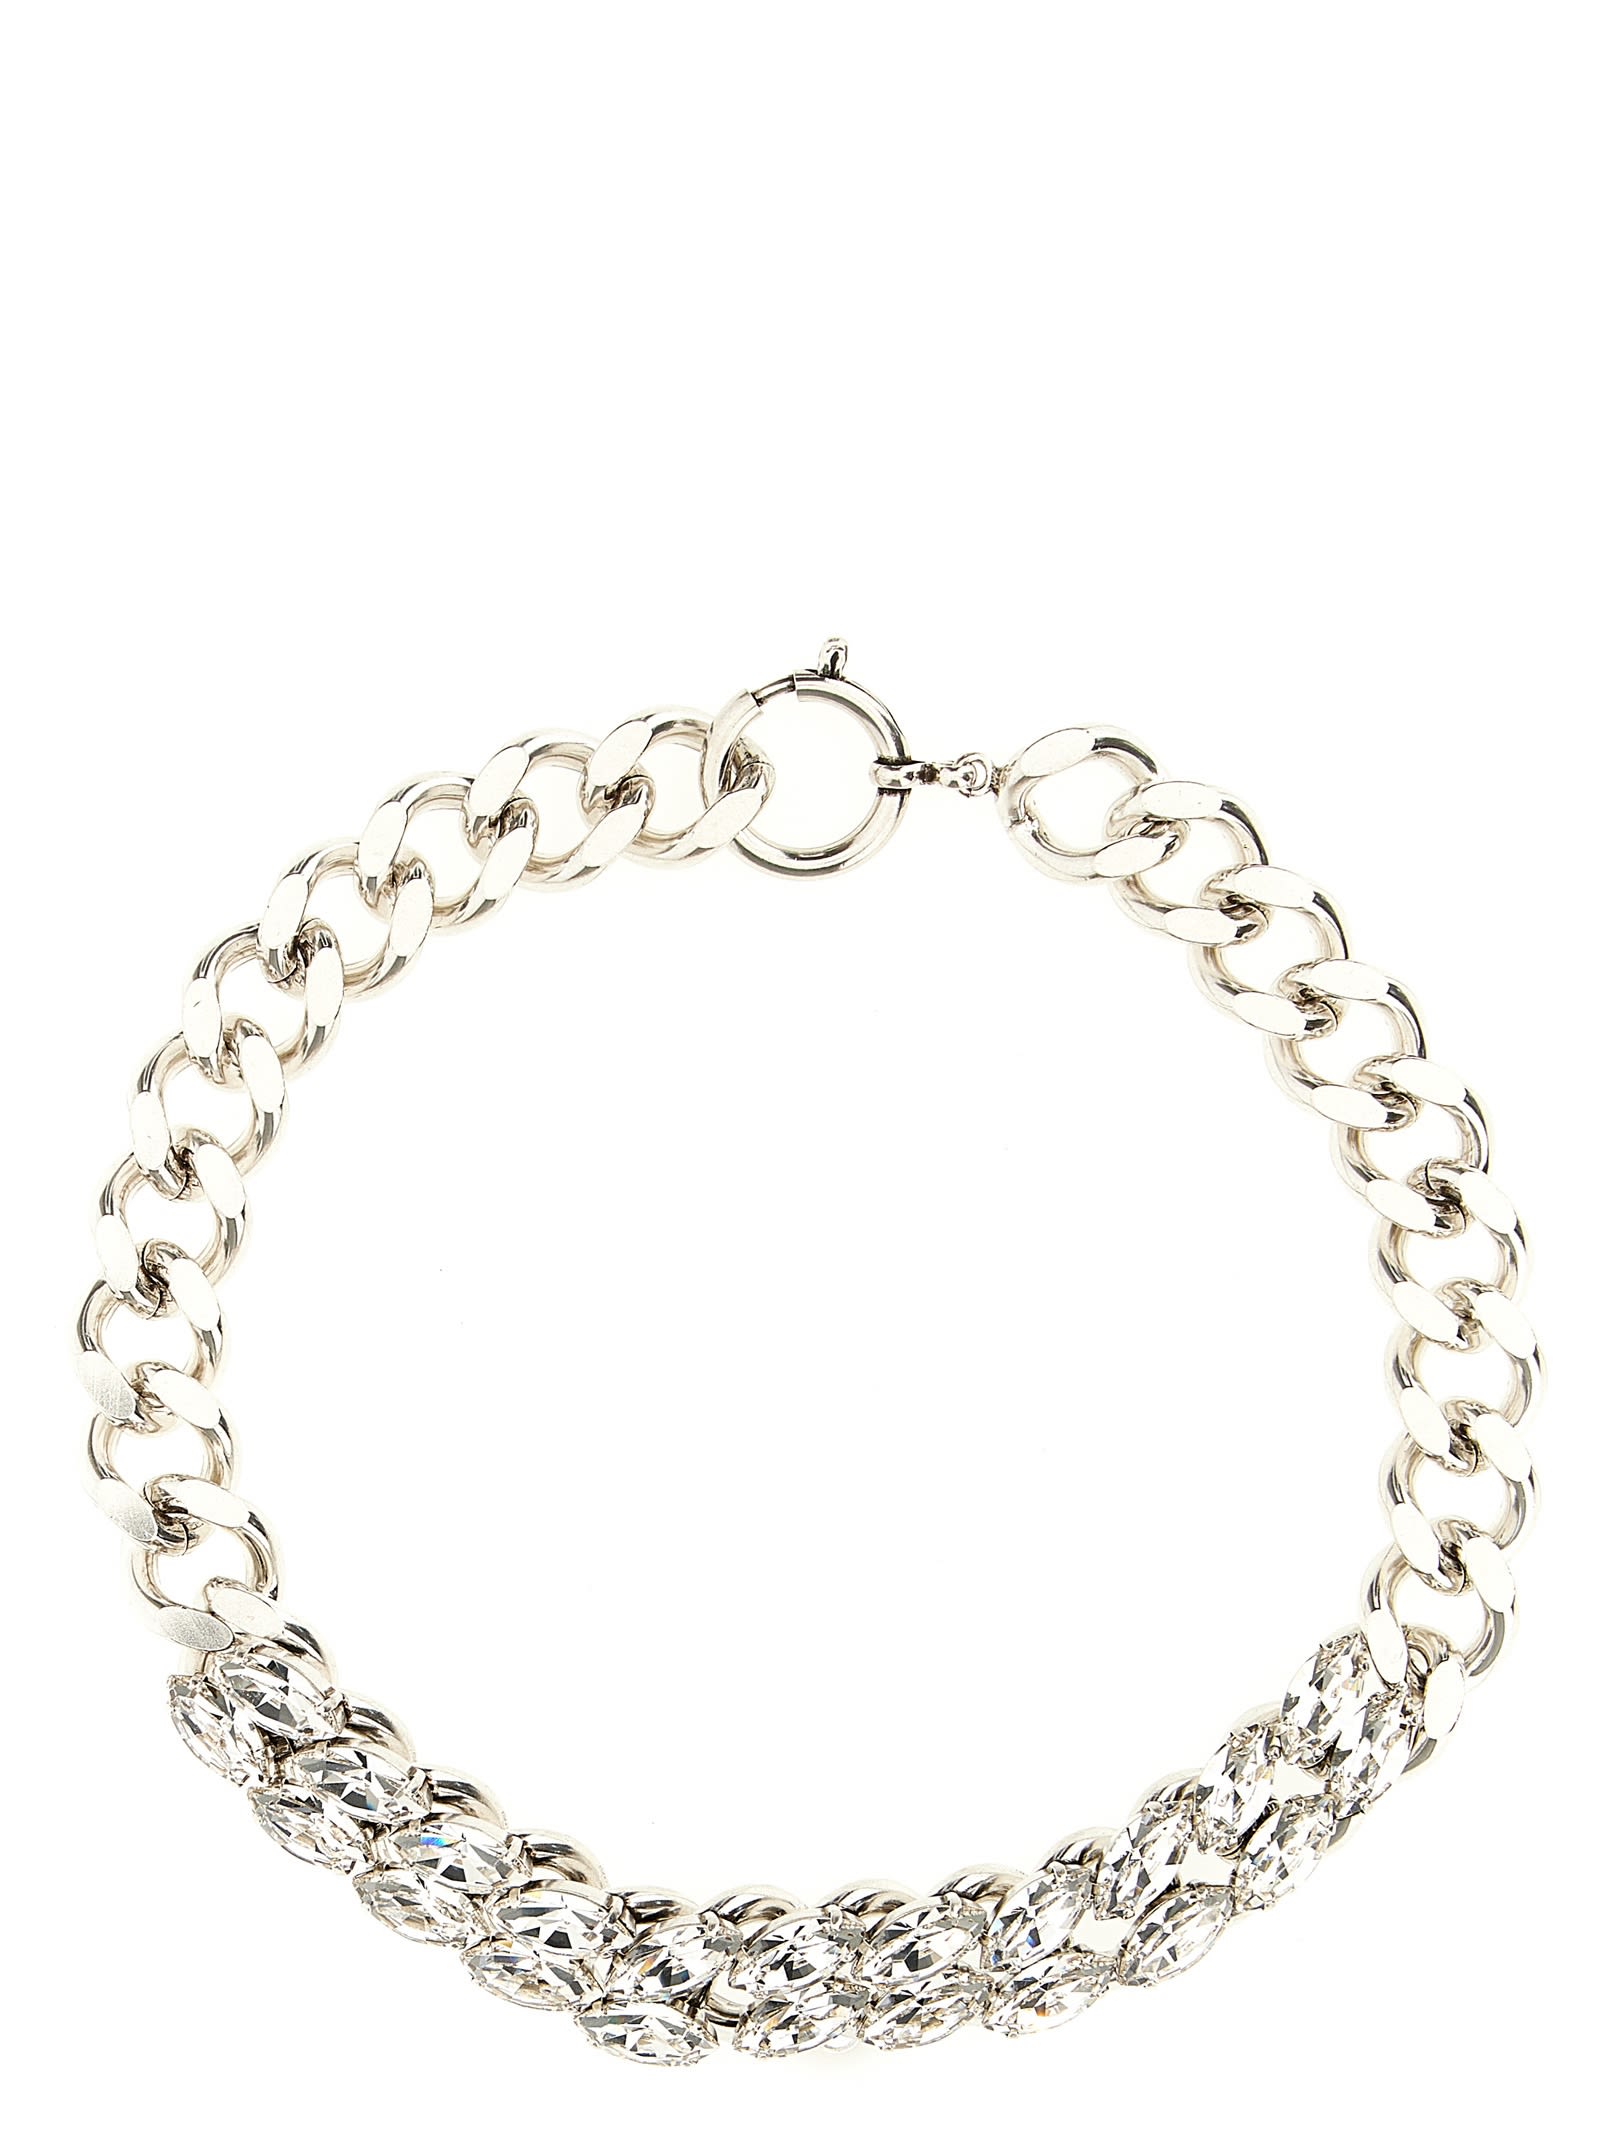 ISABEL MARANT CRYSTAL CHAIN NECKLACE